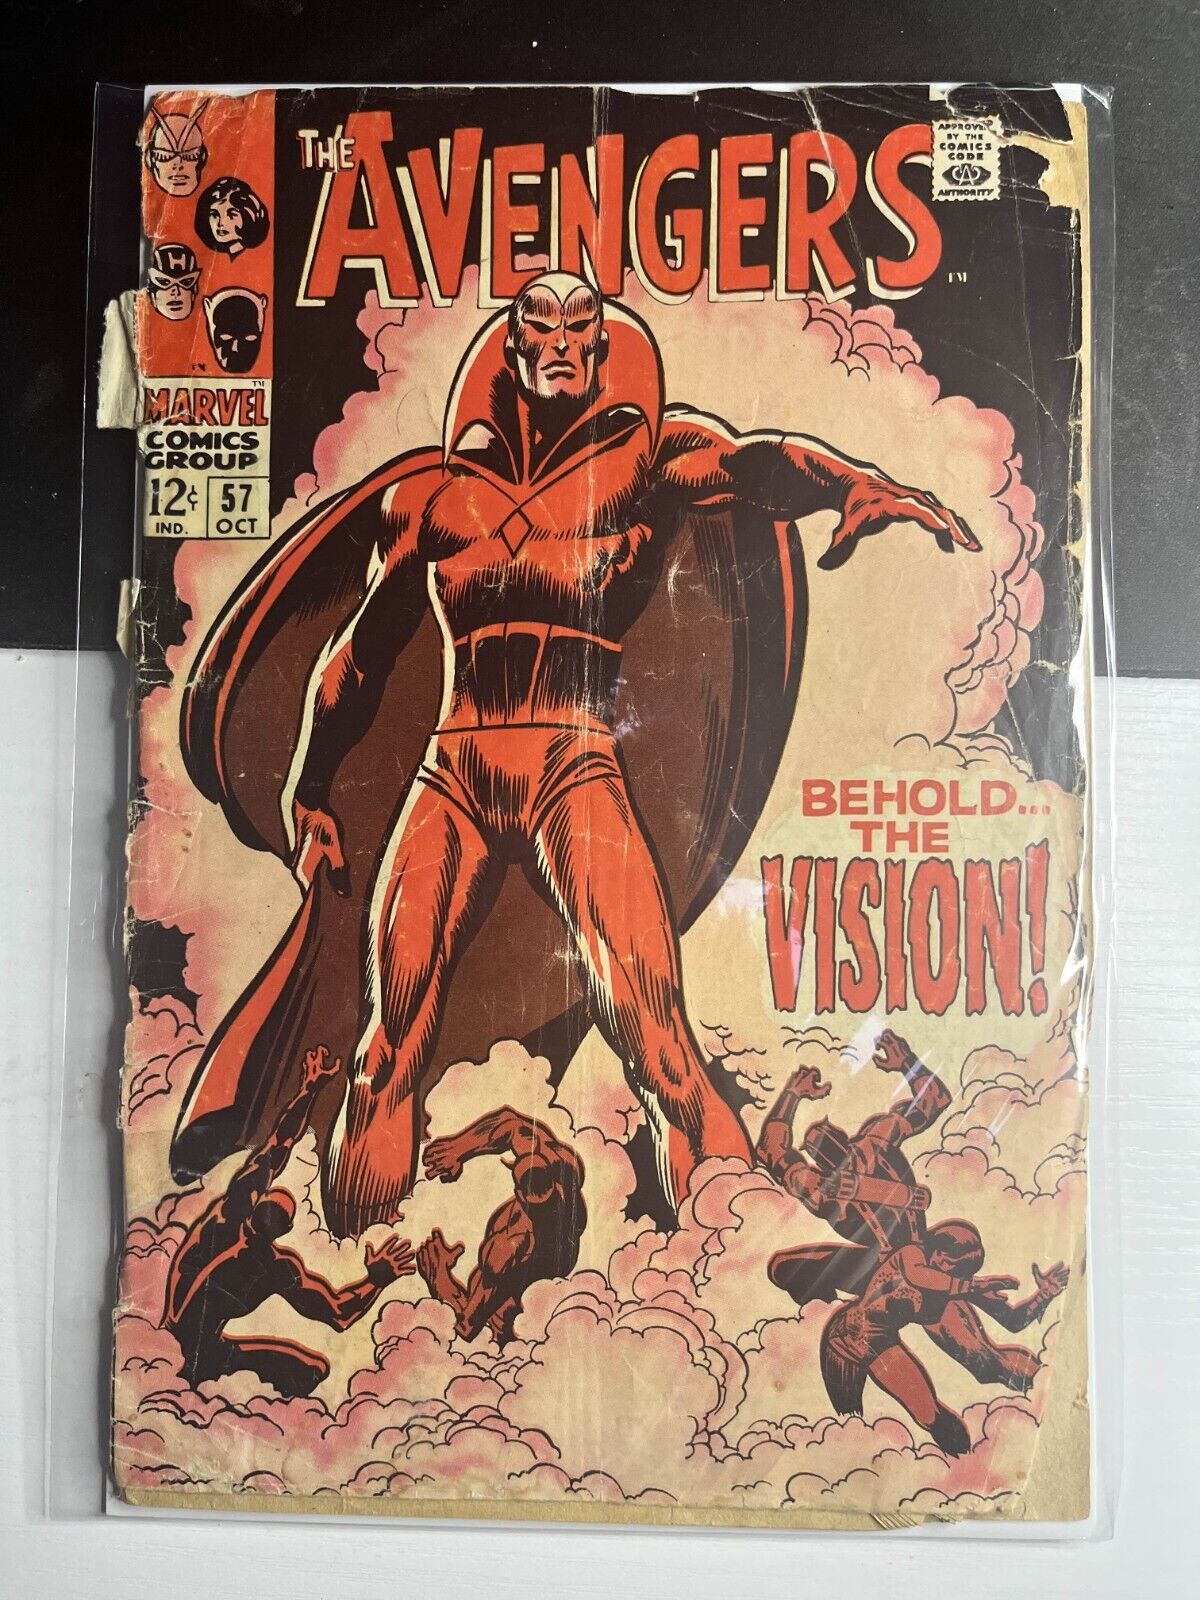 The Avengers #57 'Behold The Vision' - 1st Appearance of Vision